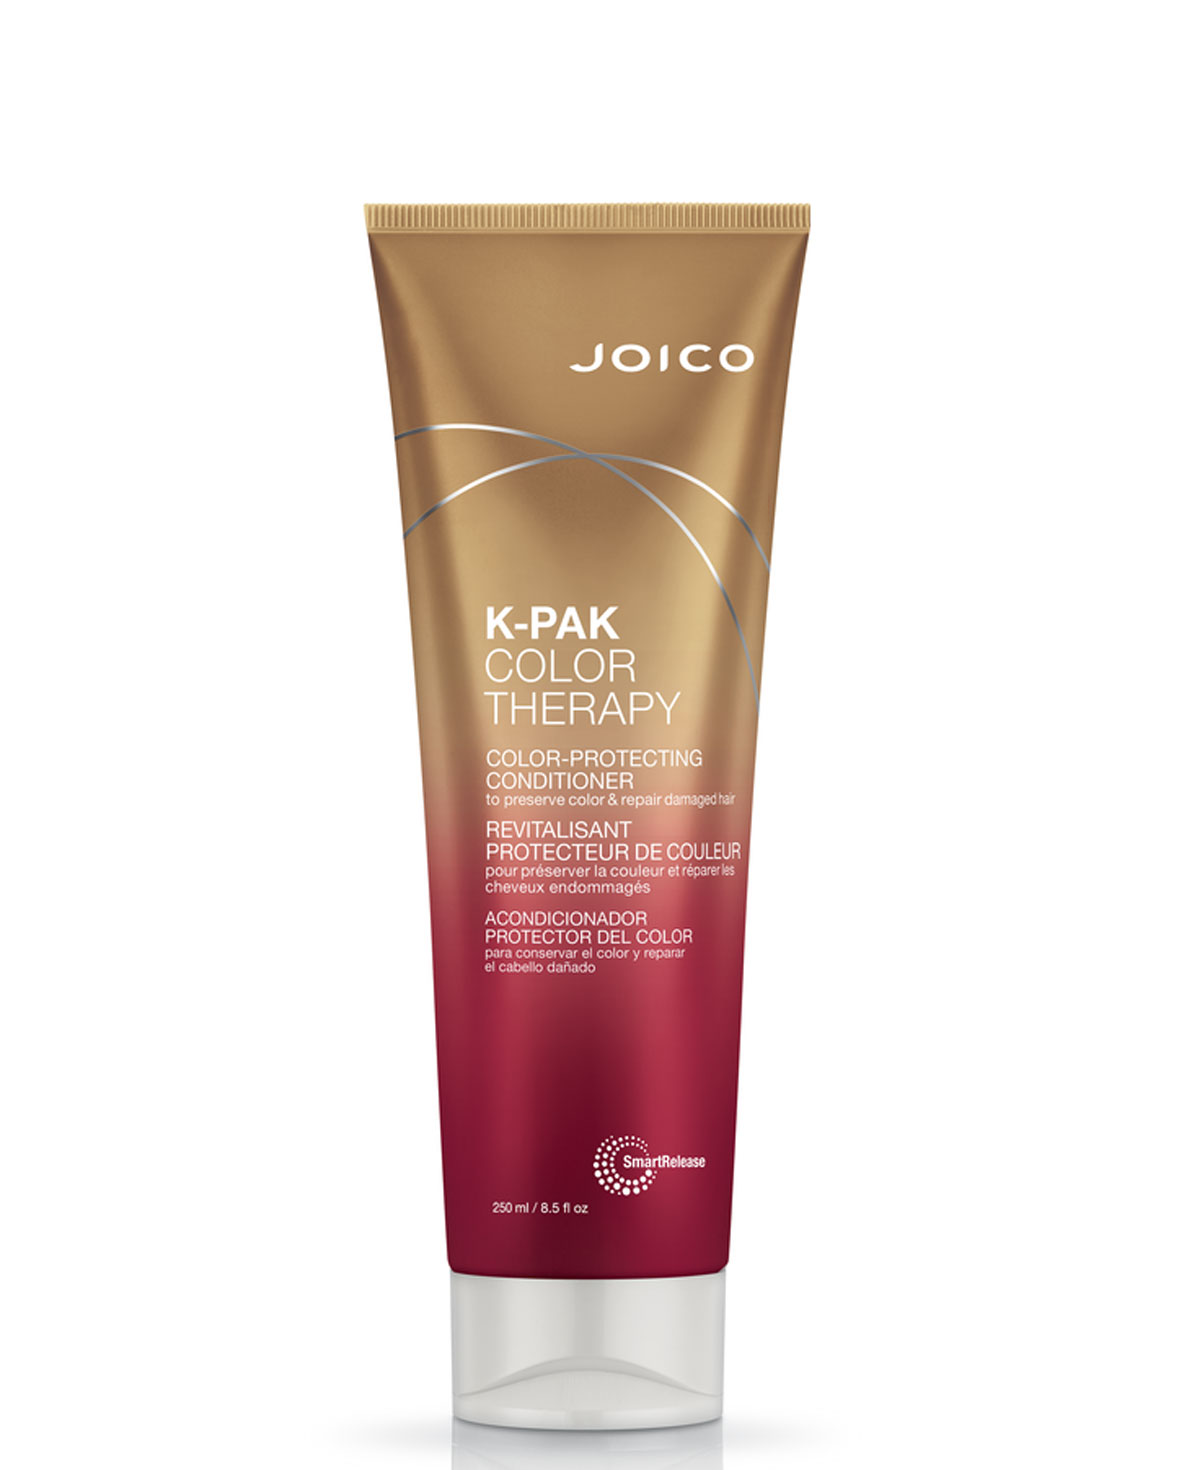 Joico K-PAK Color Therapy Color-Protecting Conditioner 250ml 